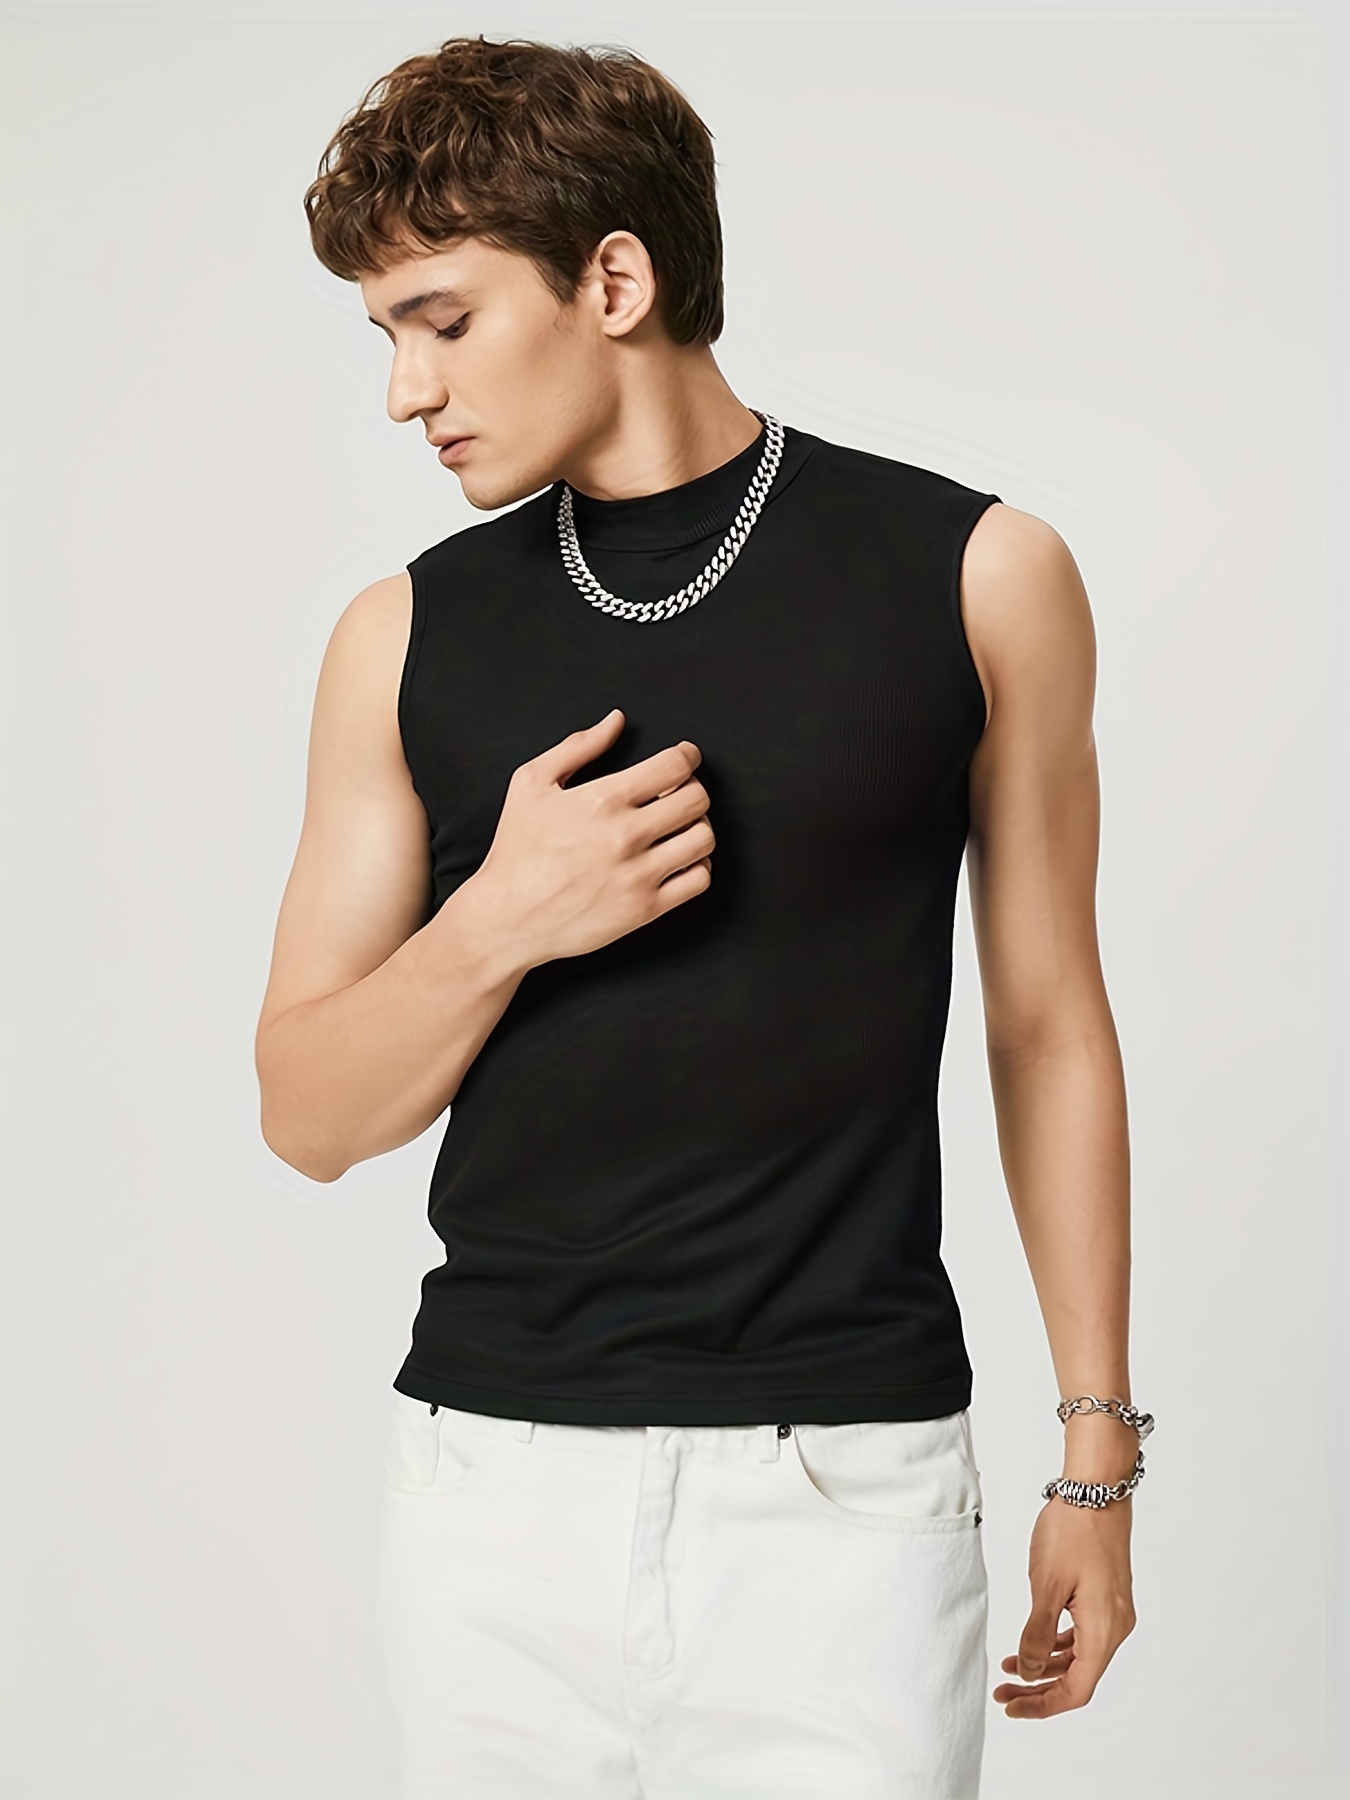 Sexy Stylish Slim Fit Tank Top, Men's Casual Street Style Turtleneck Comfy  Vest For Summer Party Night Club